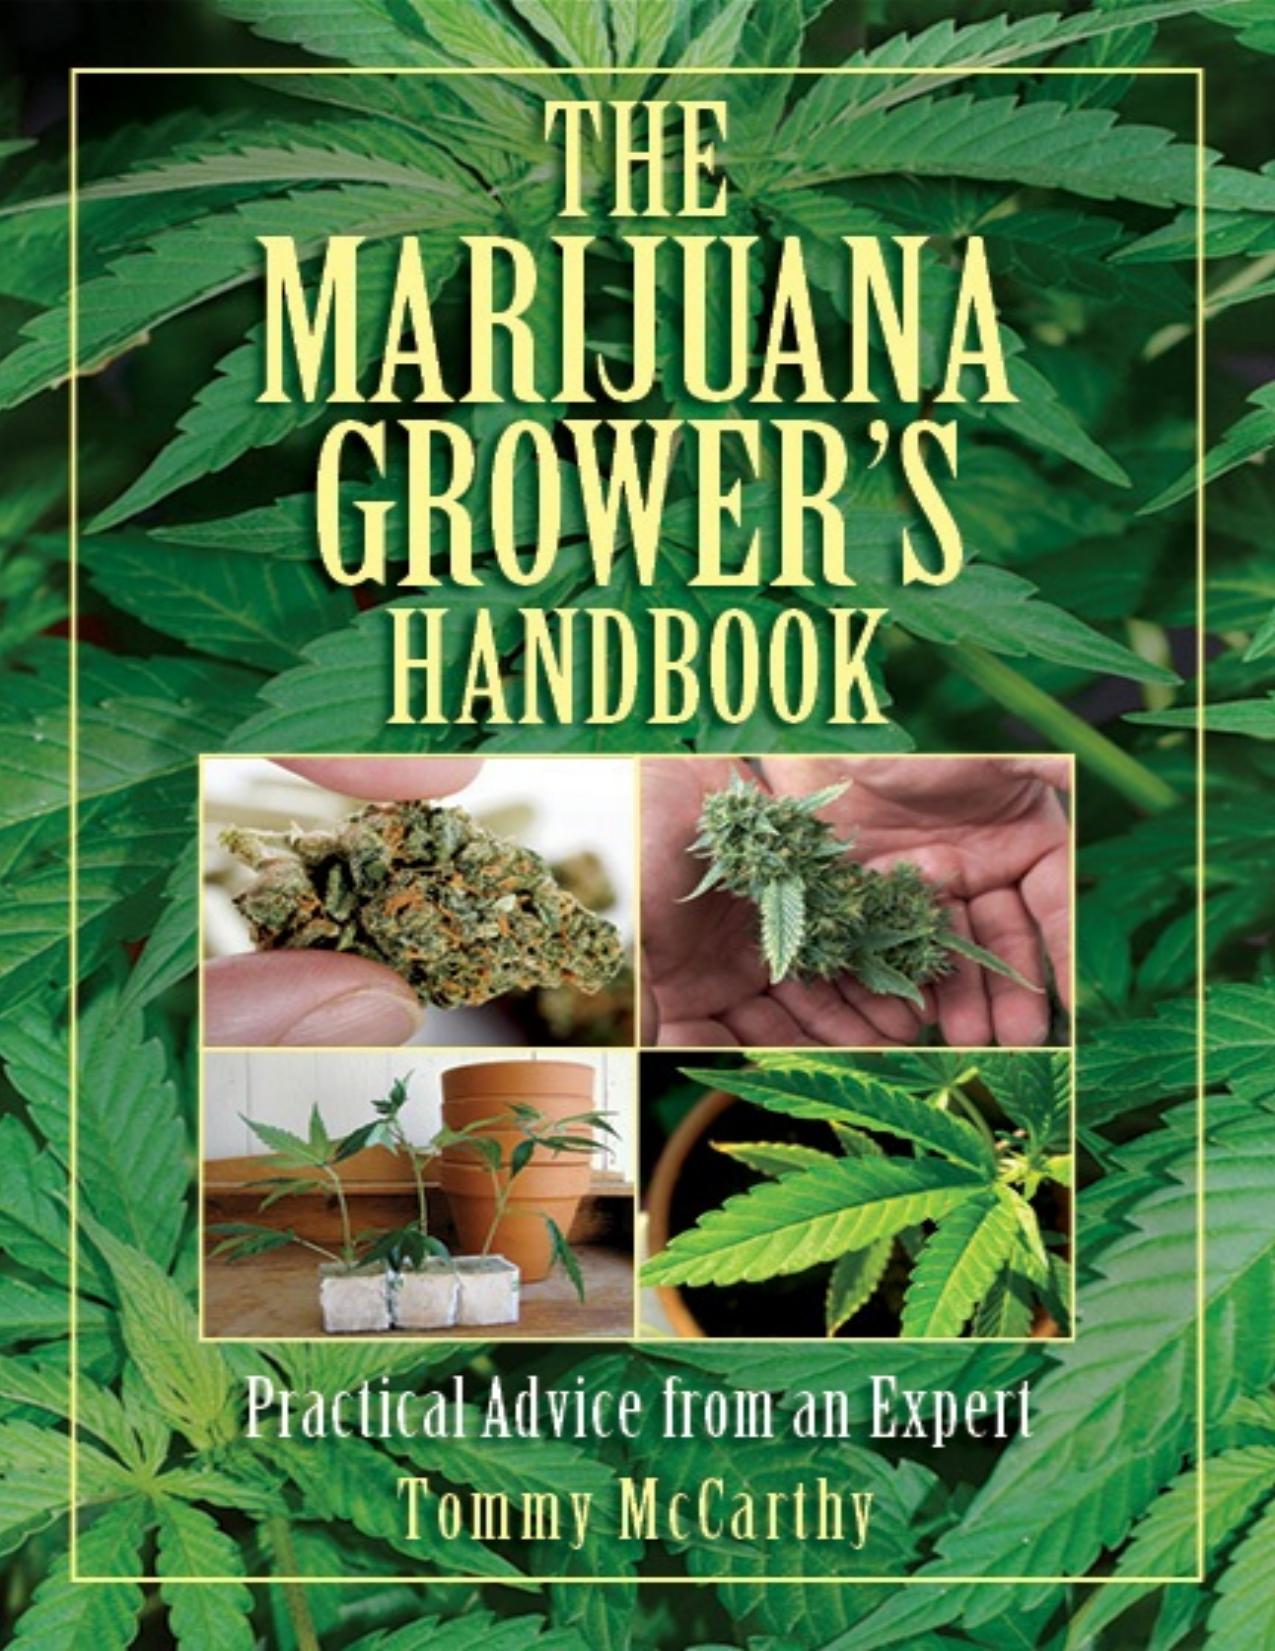 The Marijuana Grower's Handbook: Practical Advice from an Expert by Tommy McCarthy